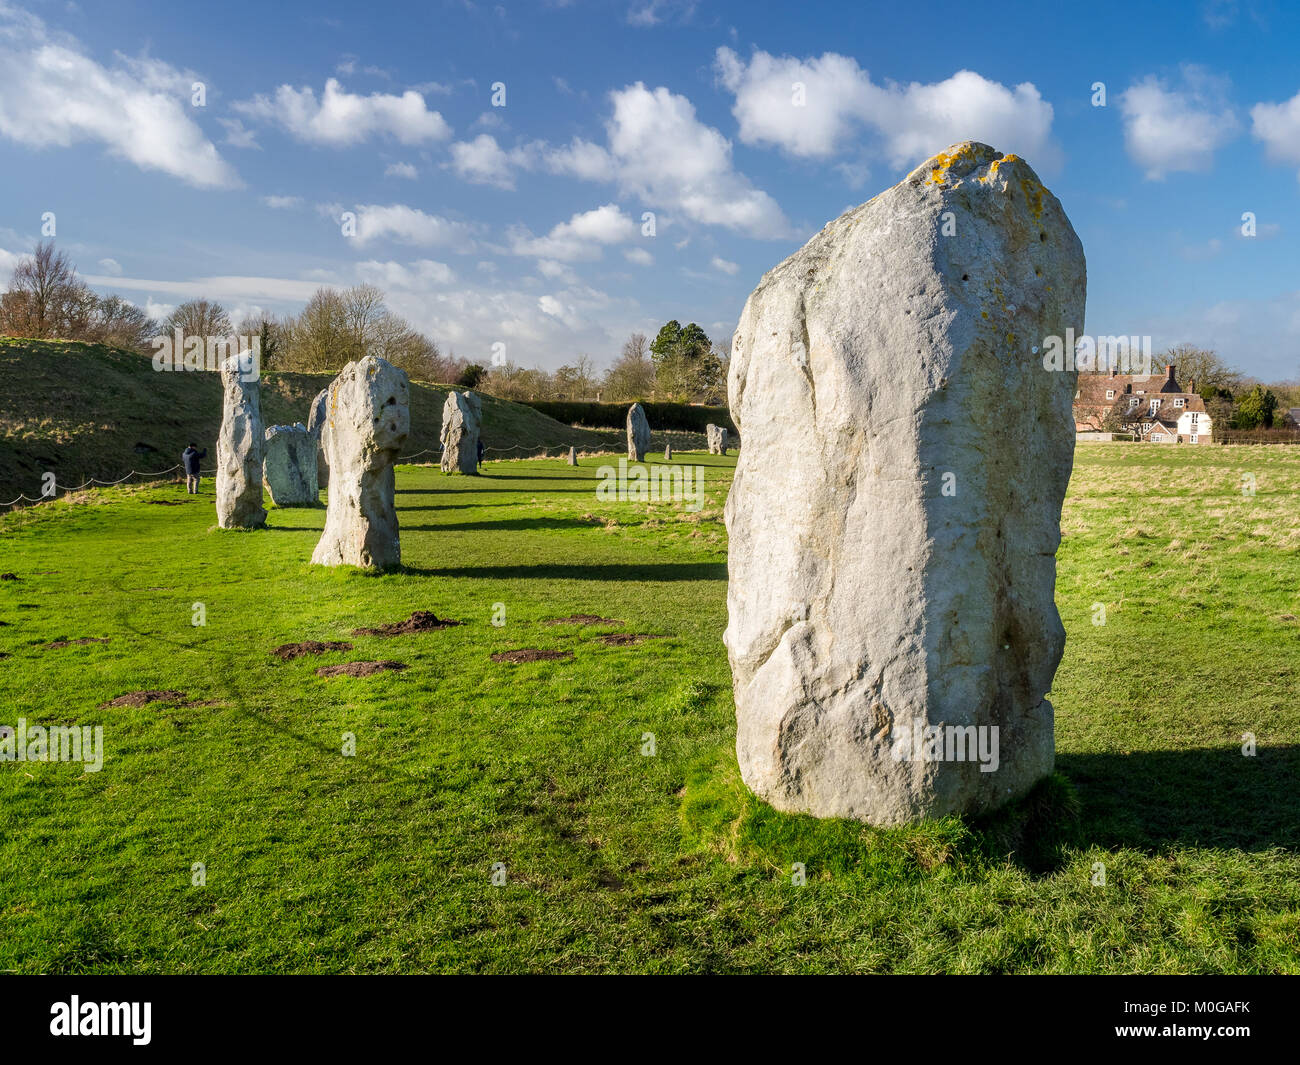 Avebury is a Neolithic henge monument containing three stone circles, and various barrows near the village of Avebury in Wiltshire, England. Stock Photo